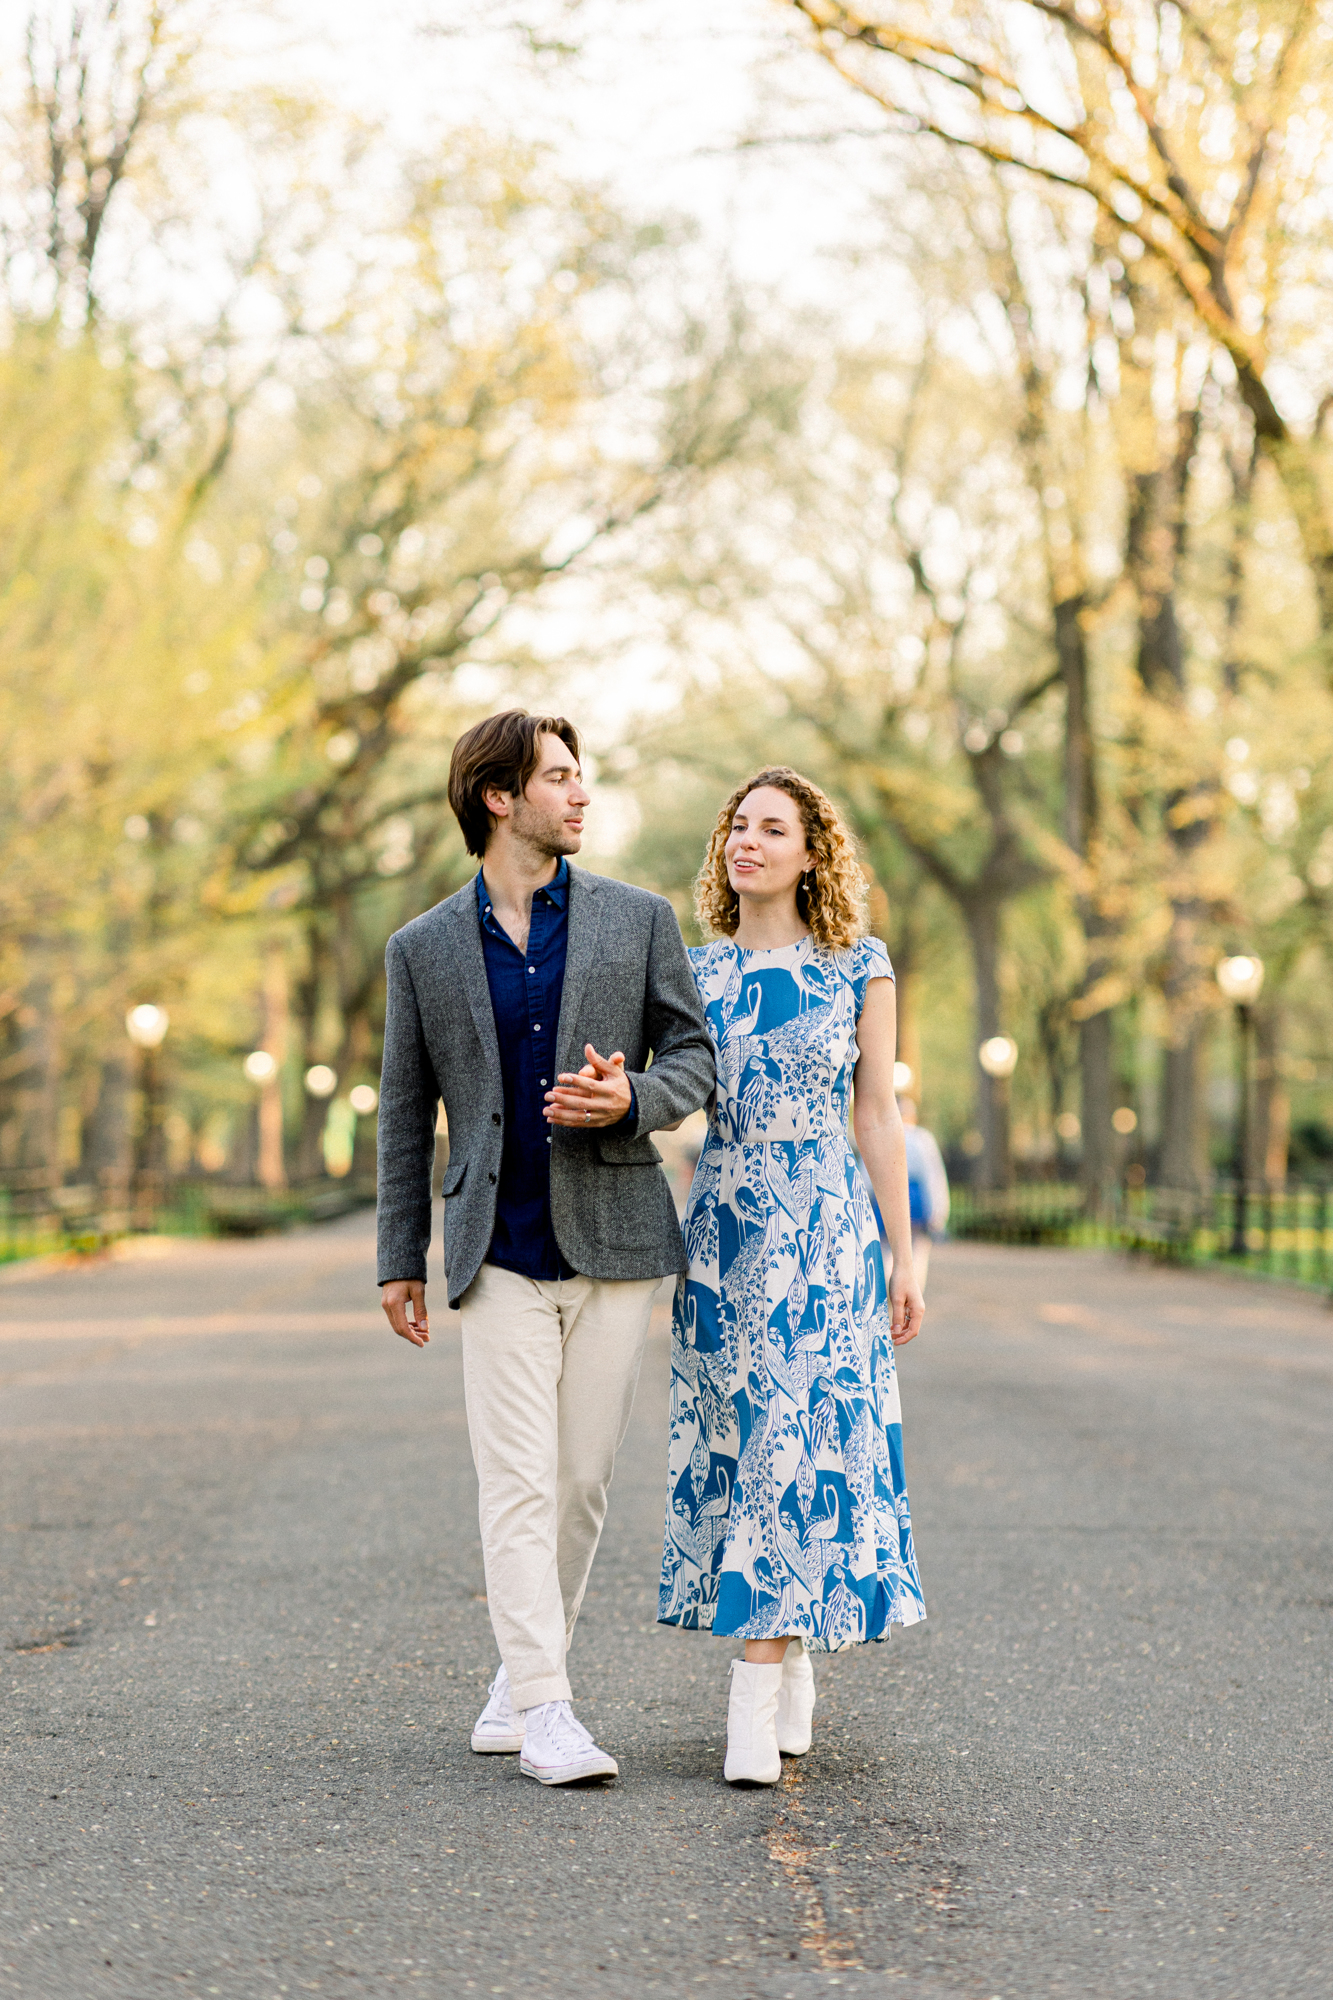 Stunning Engagement Shoot in NYC